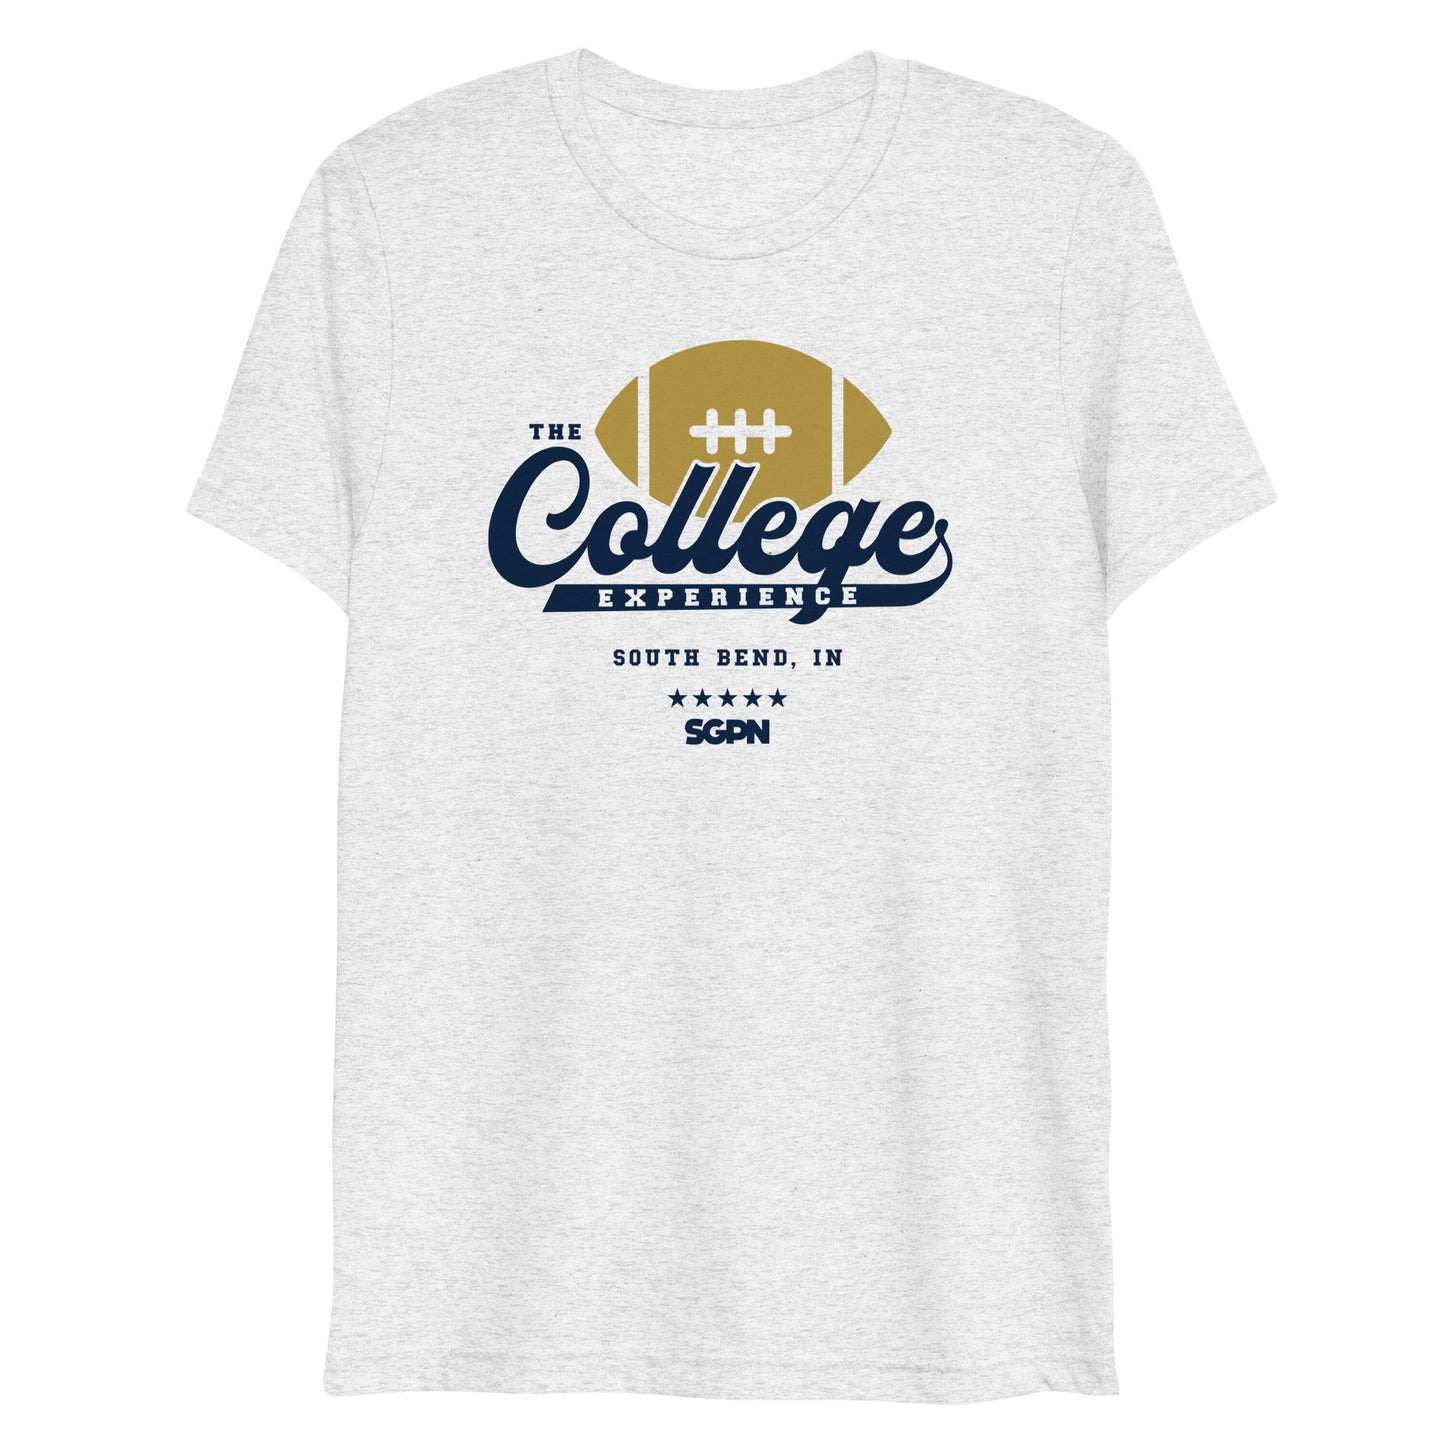 The College Football Experience - South Bend edition - White Fleck Short sleeve t-shirt